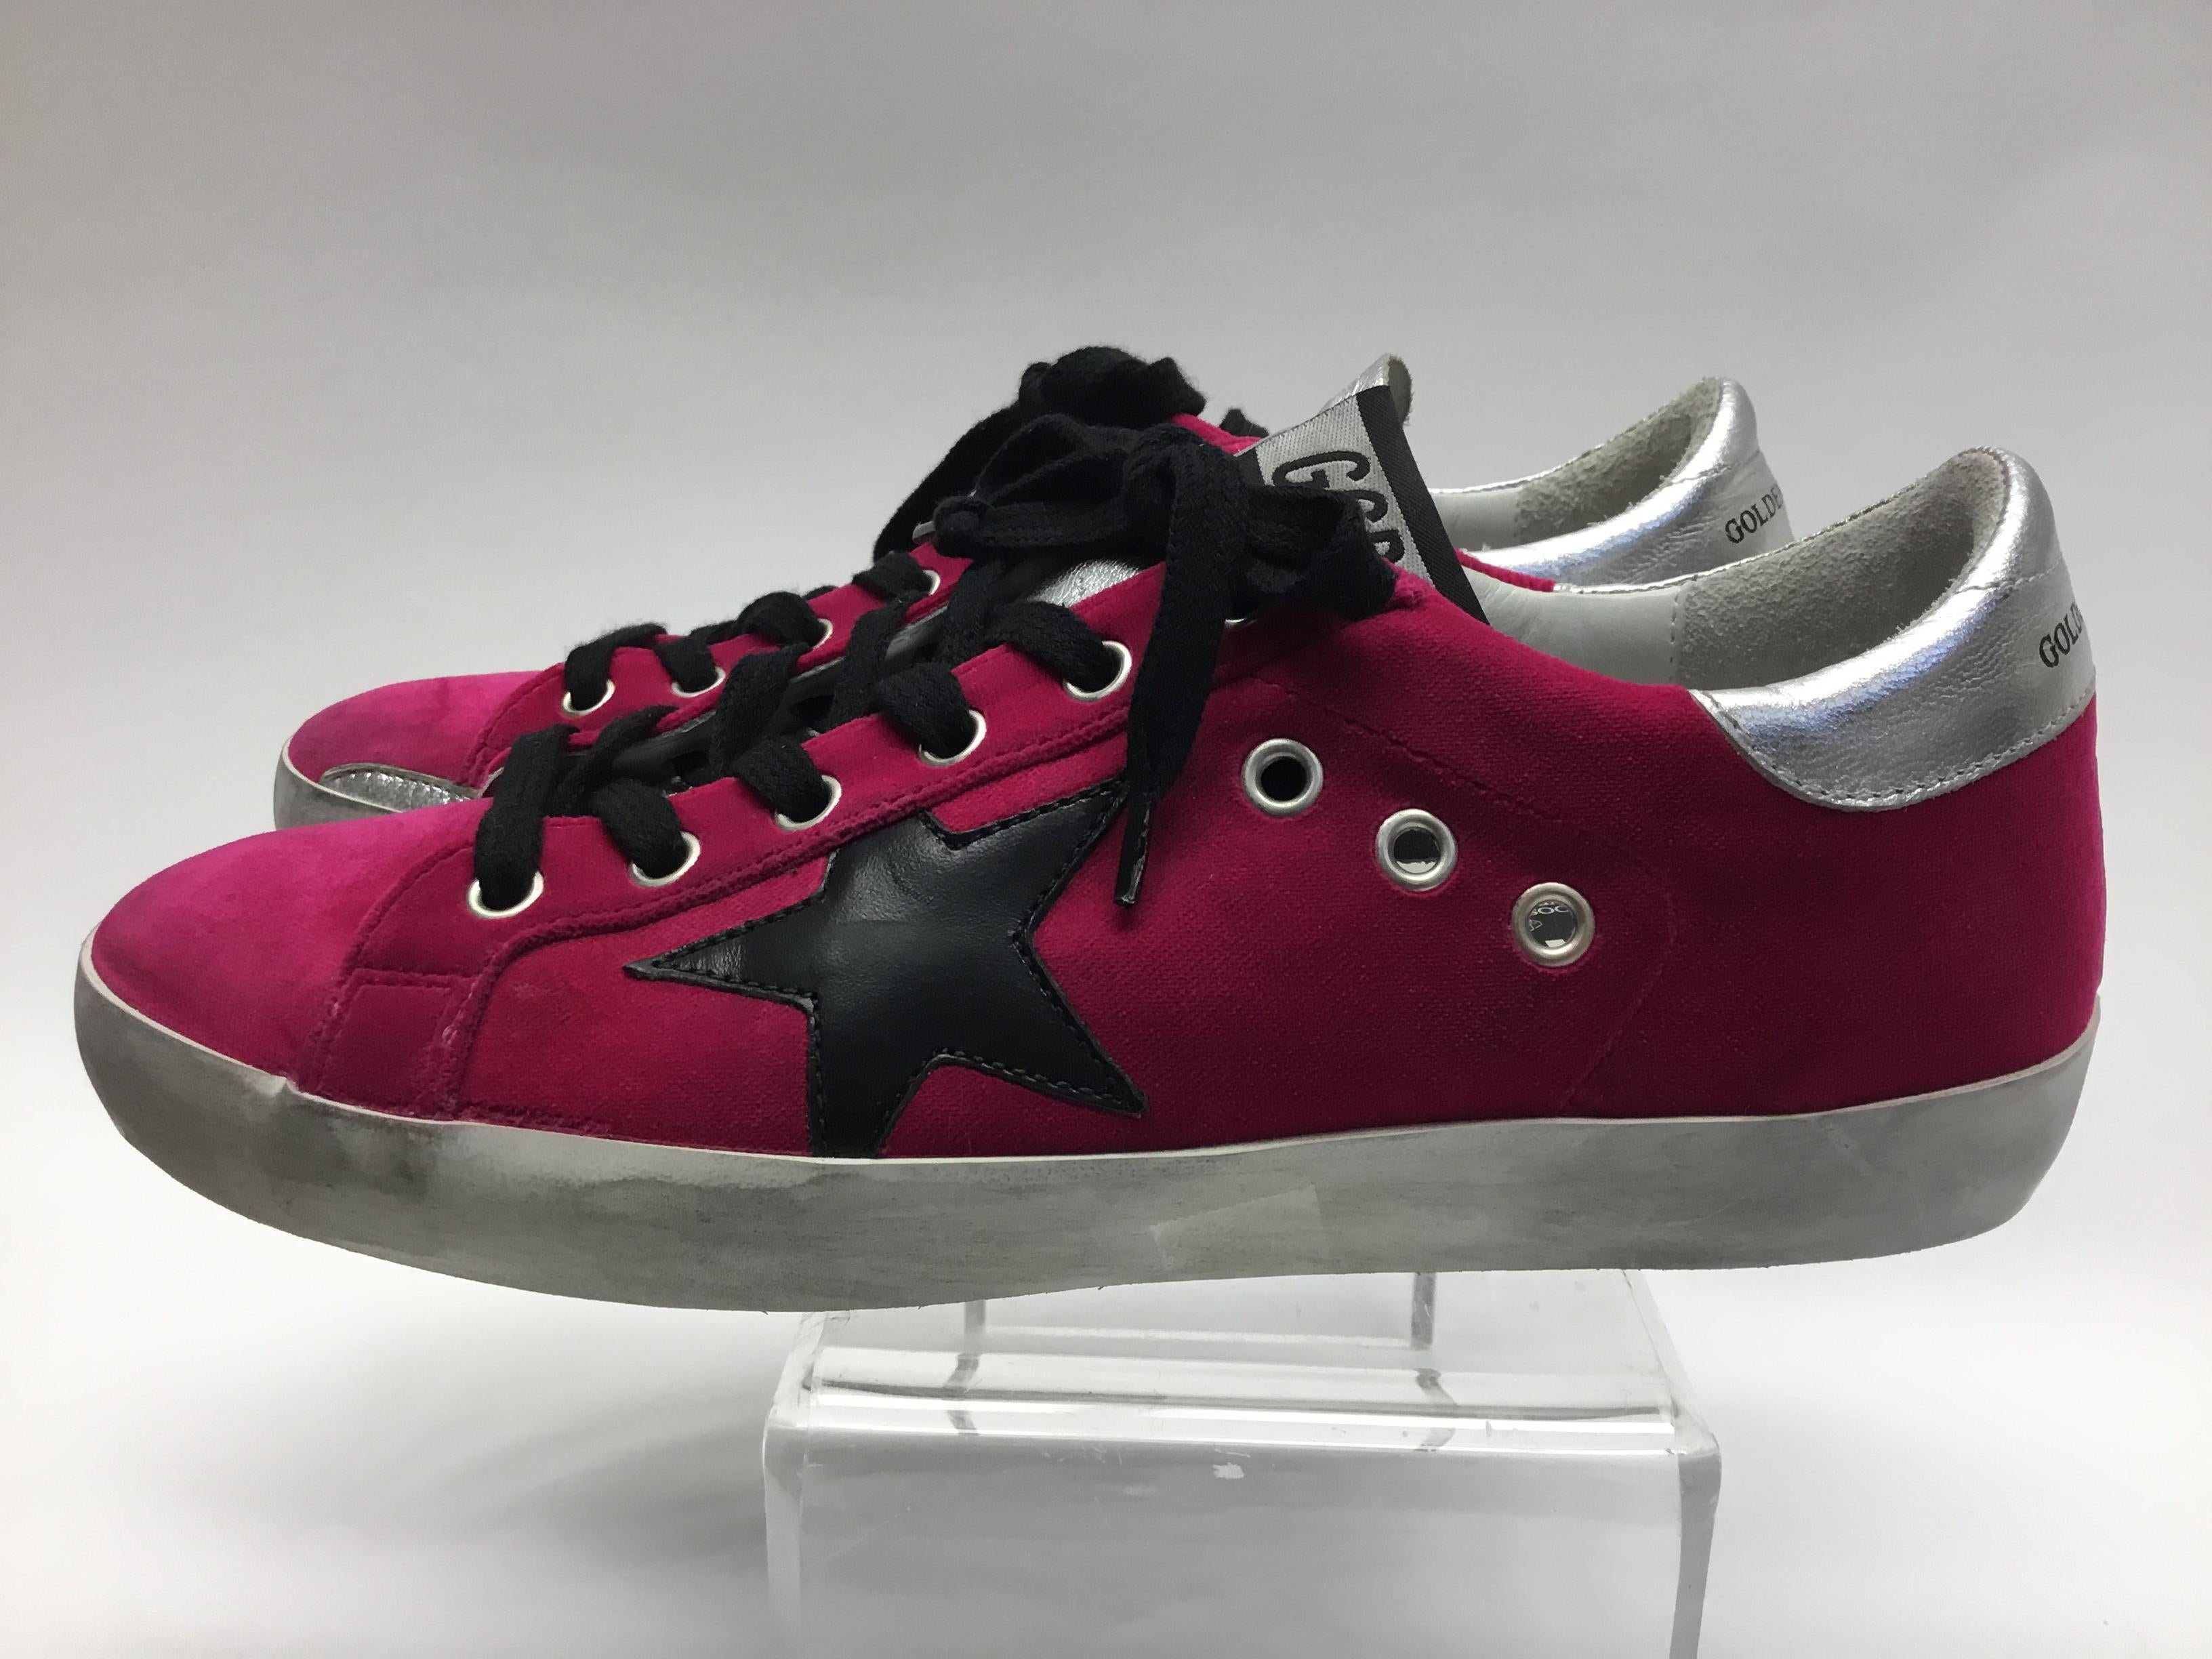 Golden Goose Pink Velvet Sneakers In Excellent Condition For Sale In Narberth, PA